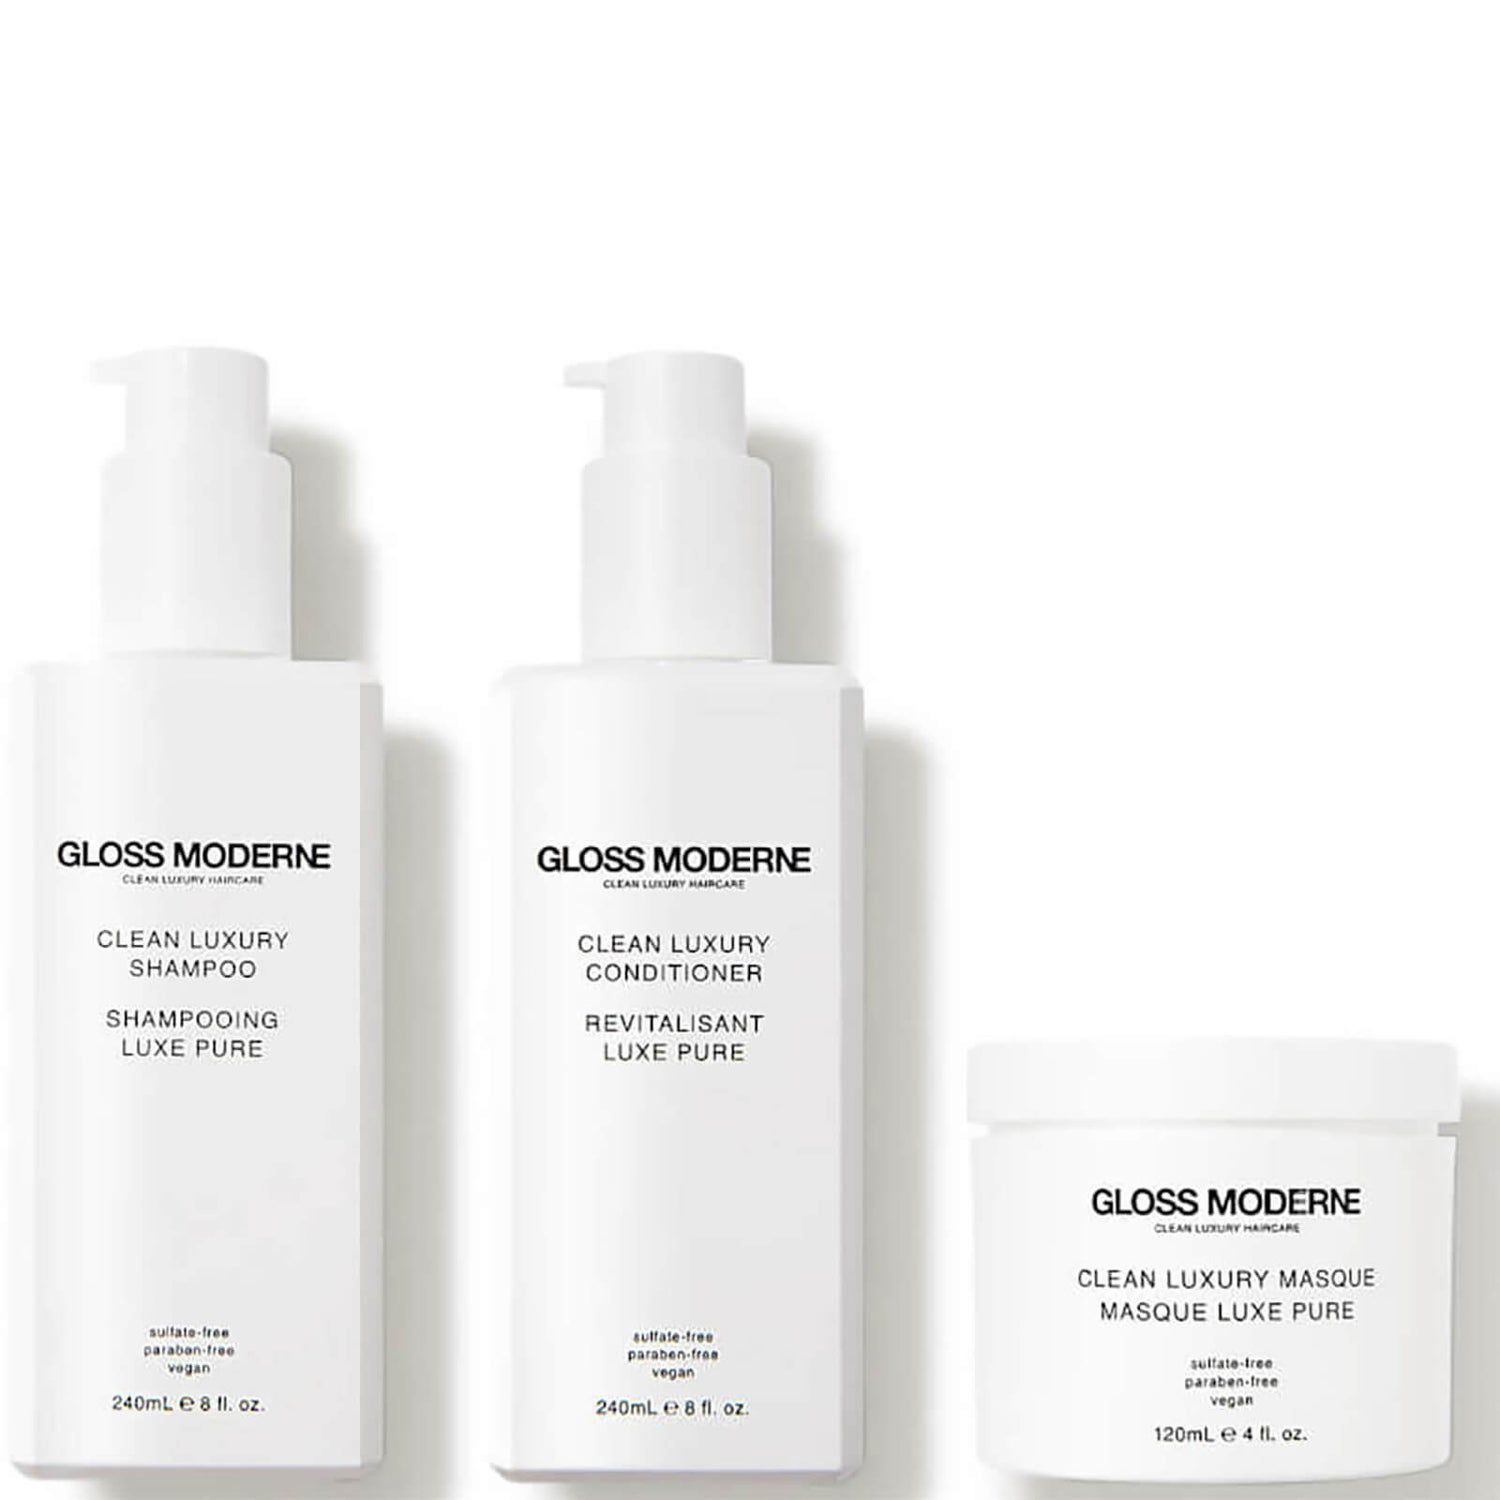 GLOSS MODERNE Clean Luxury Haircare Collection (3 piece - $155 Value)